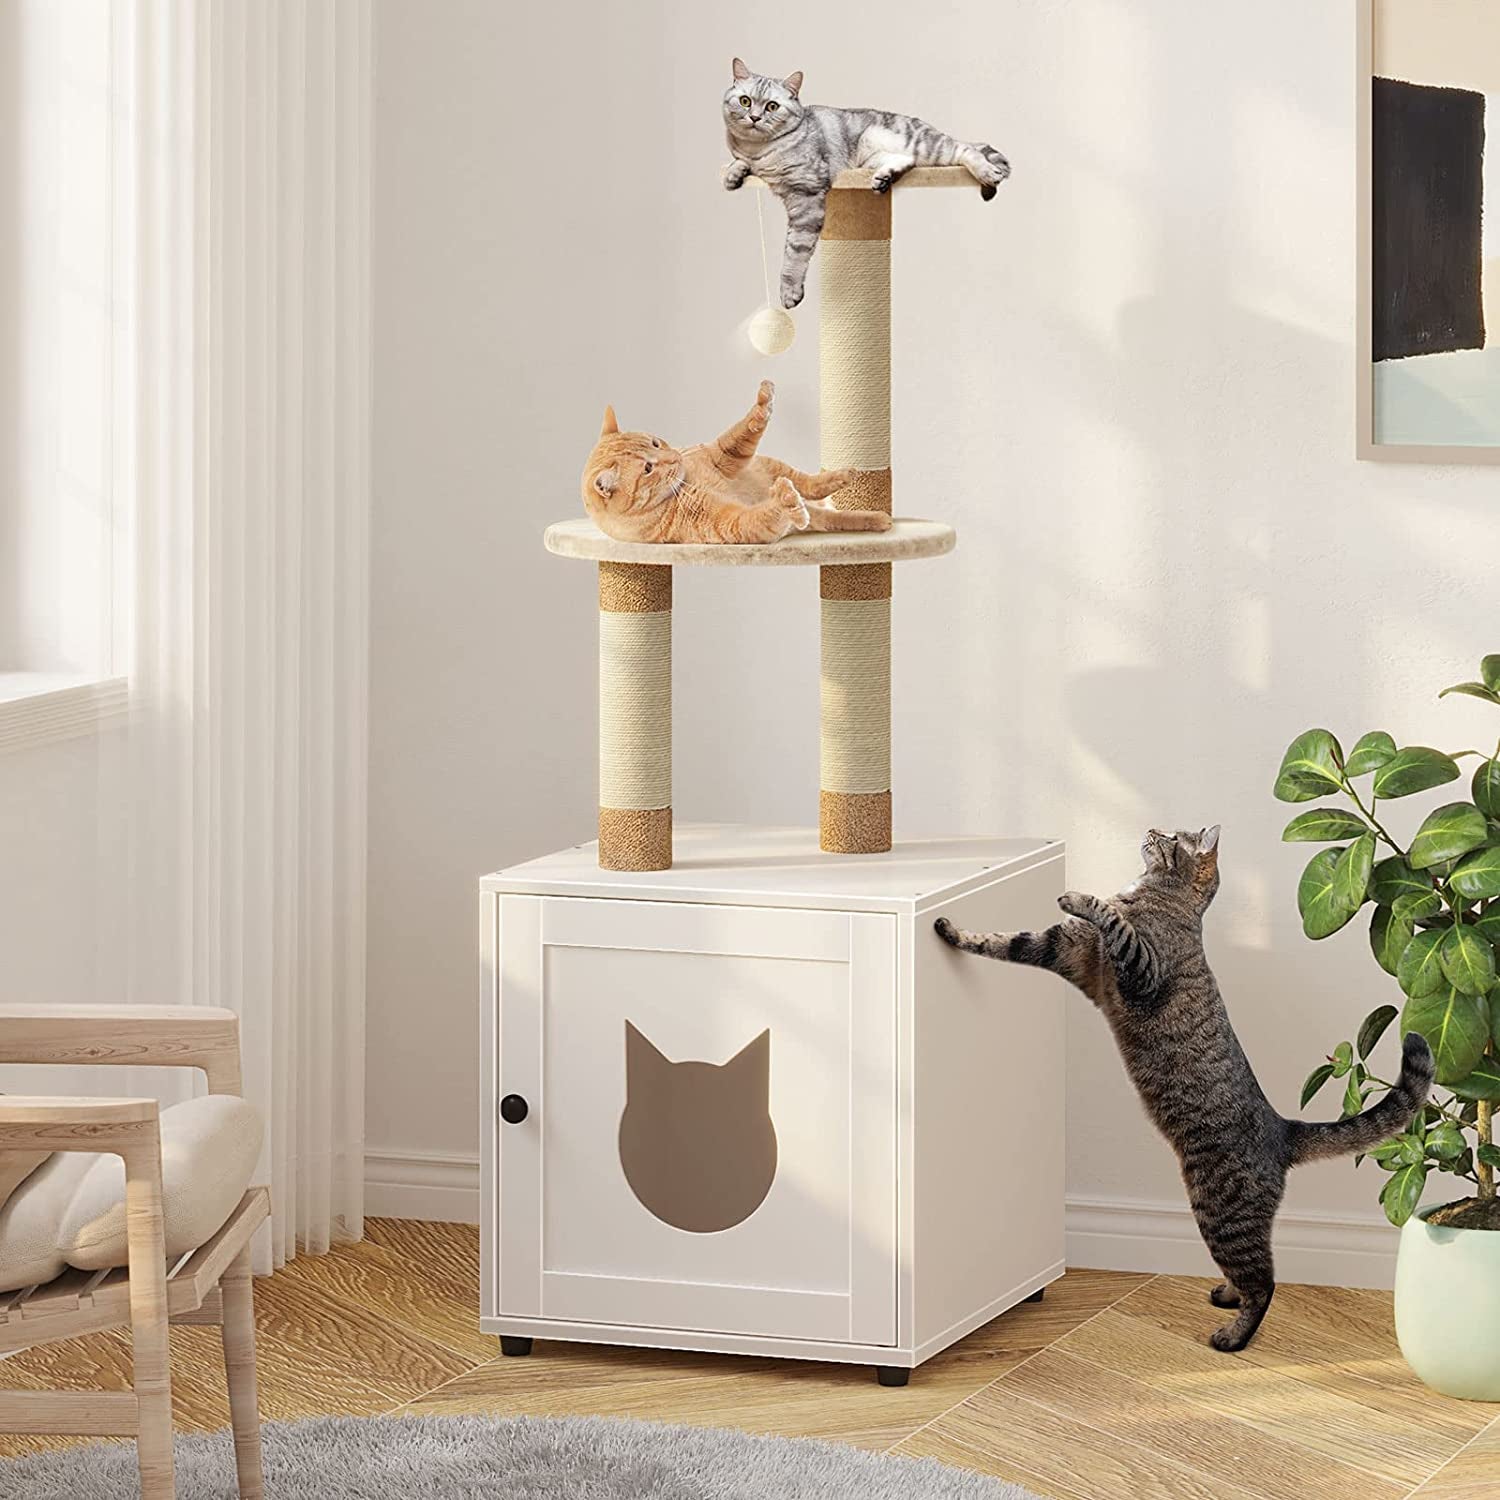 Modrern style Wooden Cat House